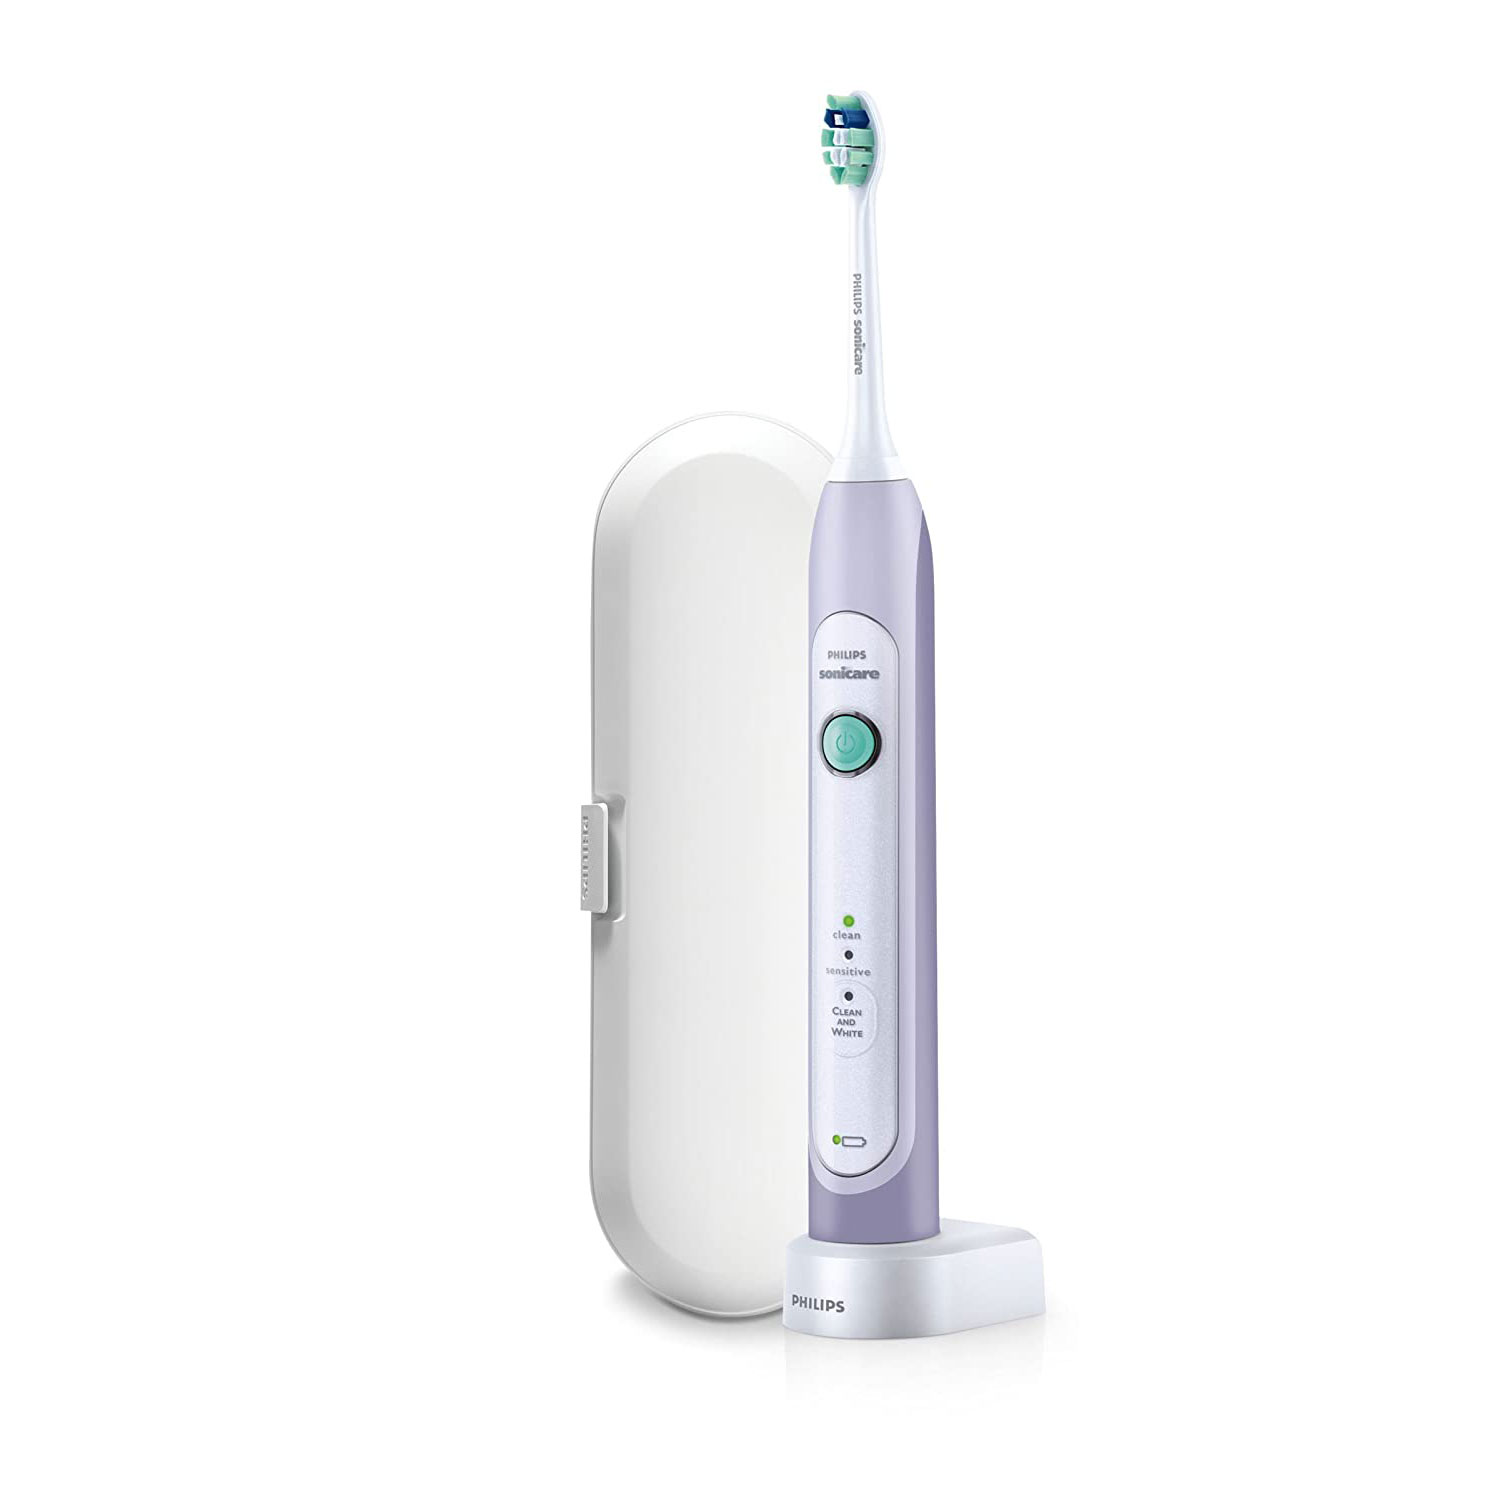 Philips Sonicare HealthyWhite Sonic Electric Rechargeable Toothbrush, Lavender - image 1 of 4